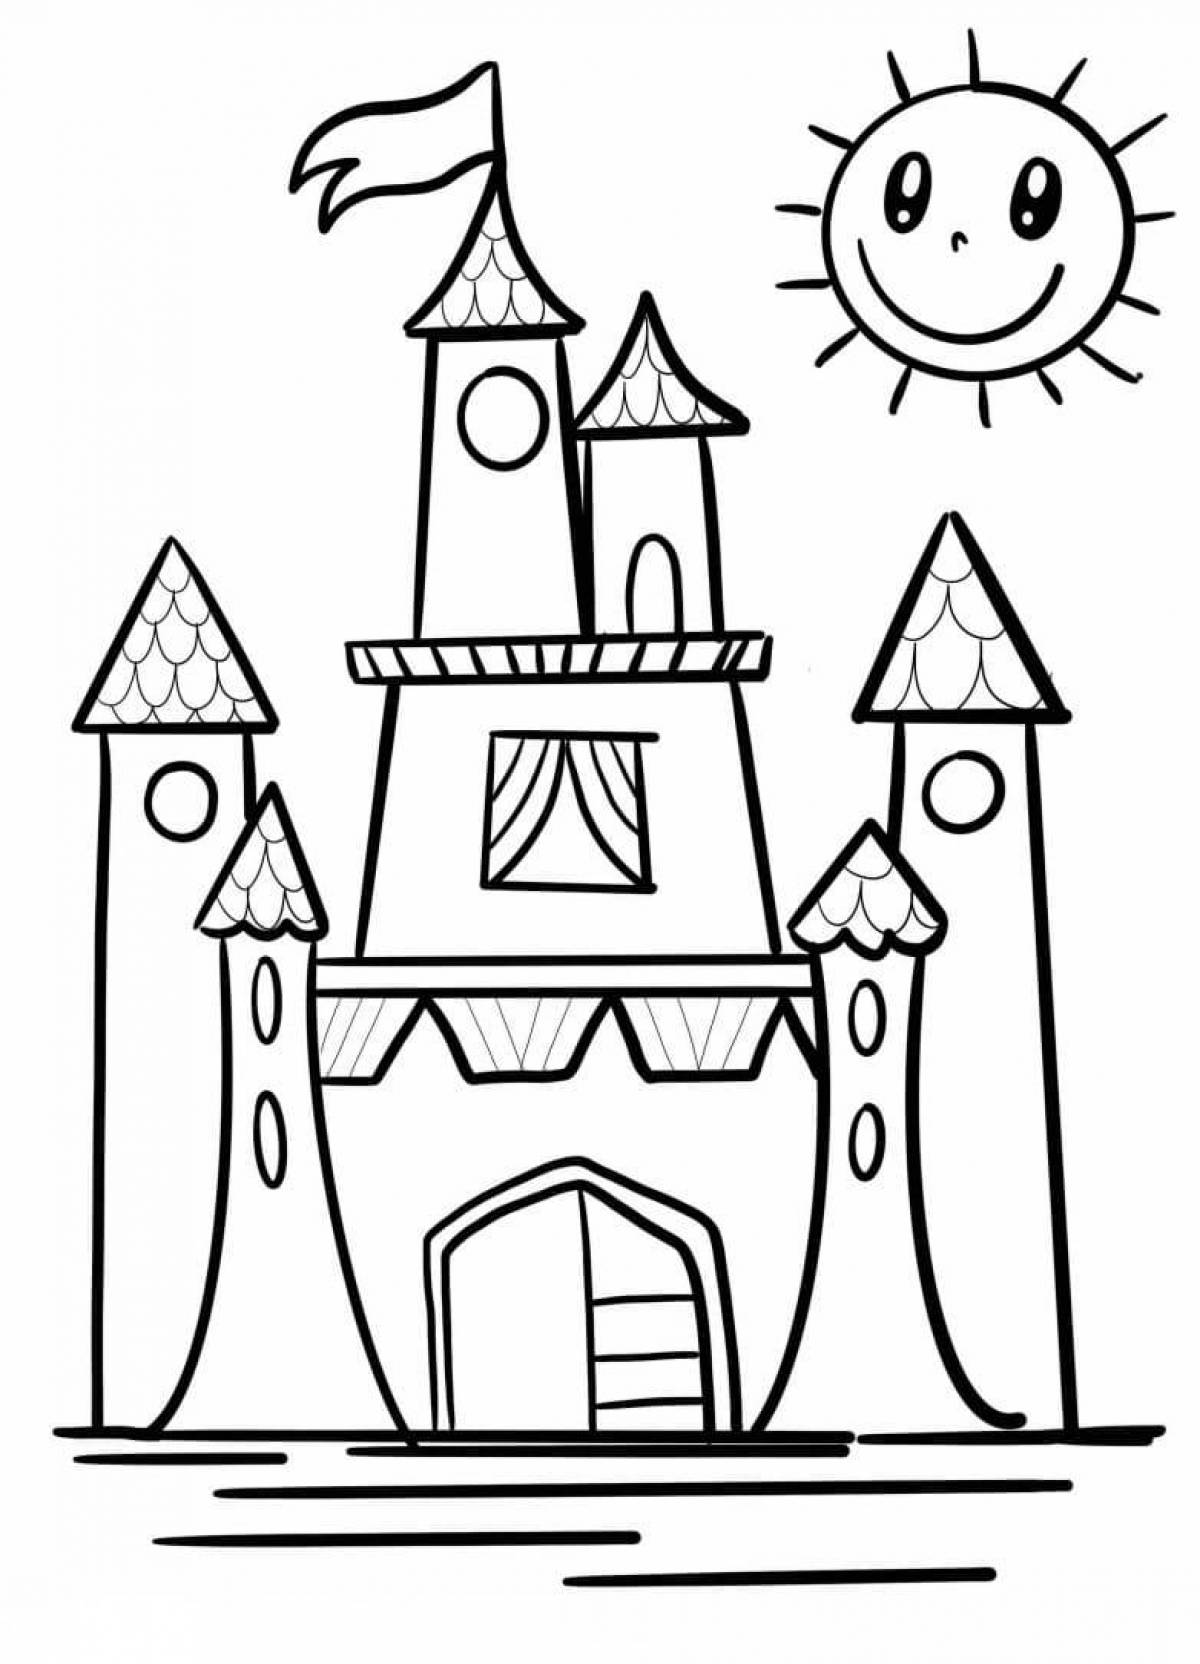 Amazing castle coloring book for kids